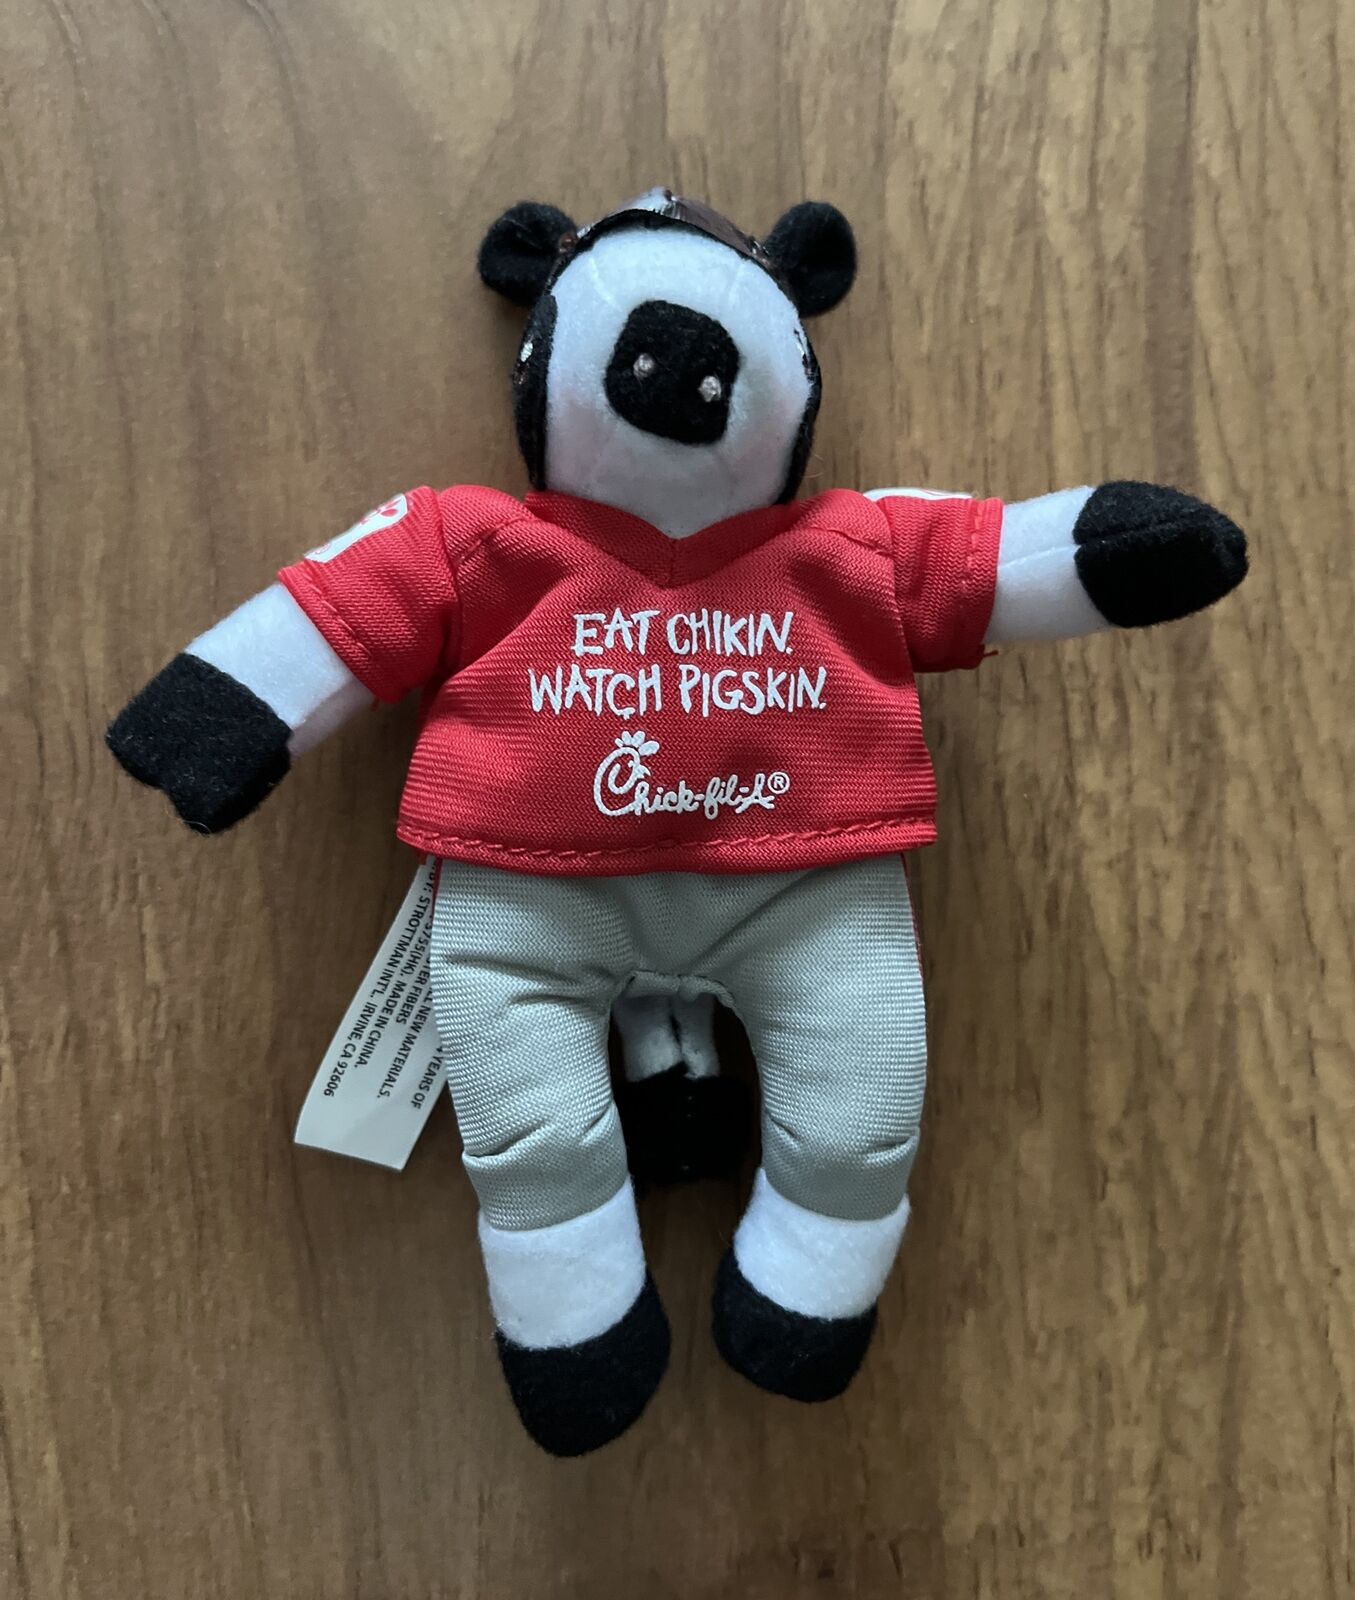 Chick Fil A Football Cow Plush Eat Chikin Watch Pigskin RARE Collectible